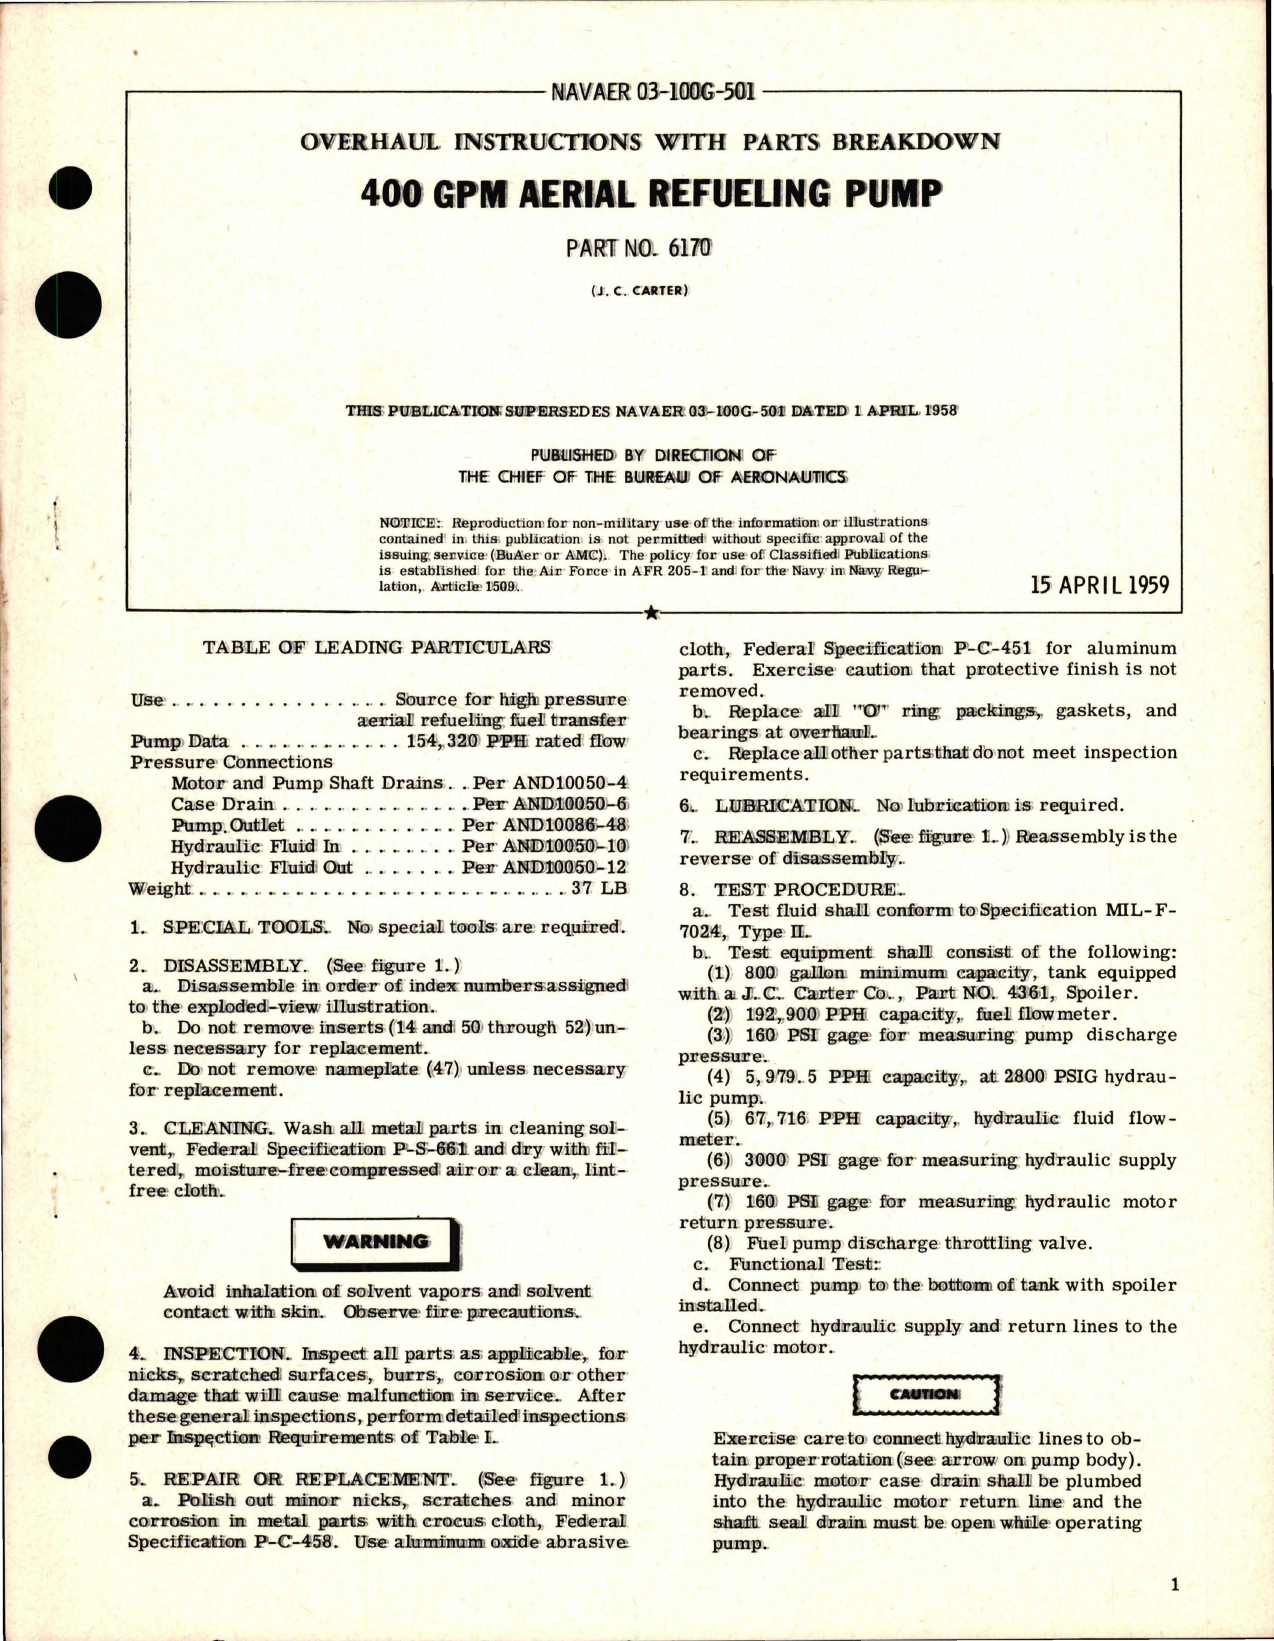 Sample page 1 from AirCorps Library document: Overhaul Instructions with Parts Breakdown for Aerial Refueling Pump 400GPM - Part 6170 